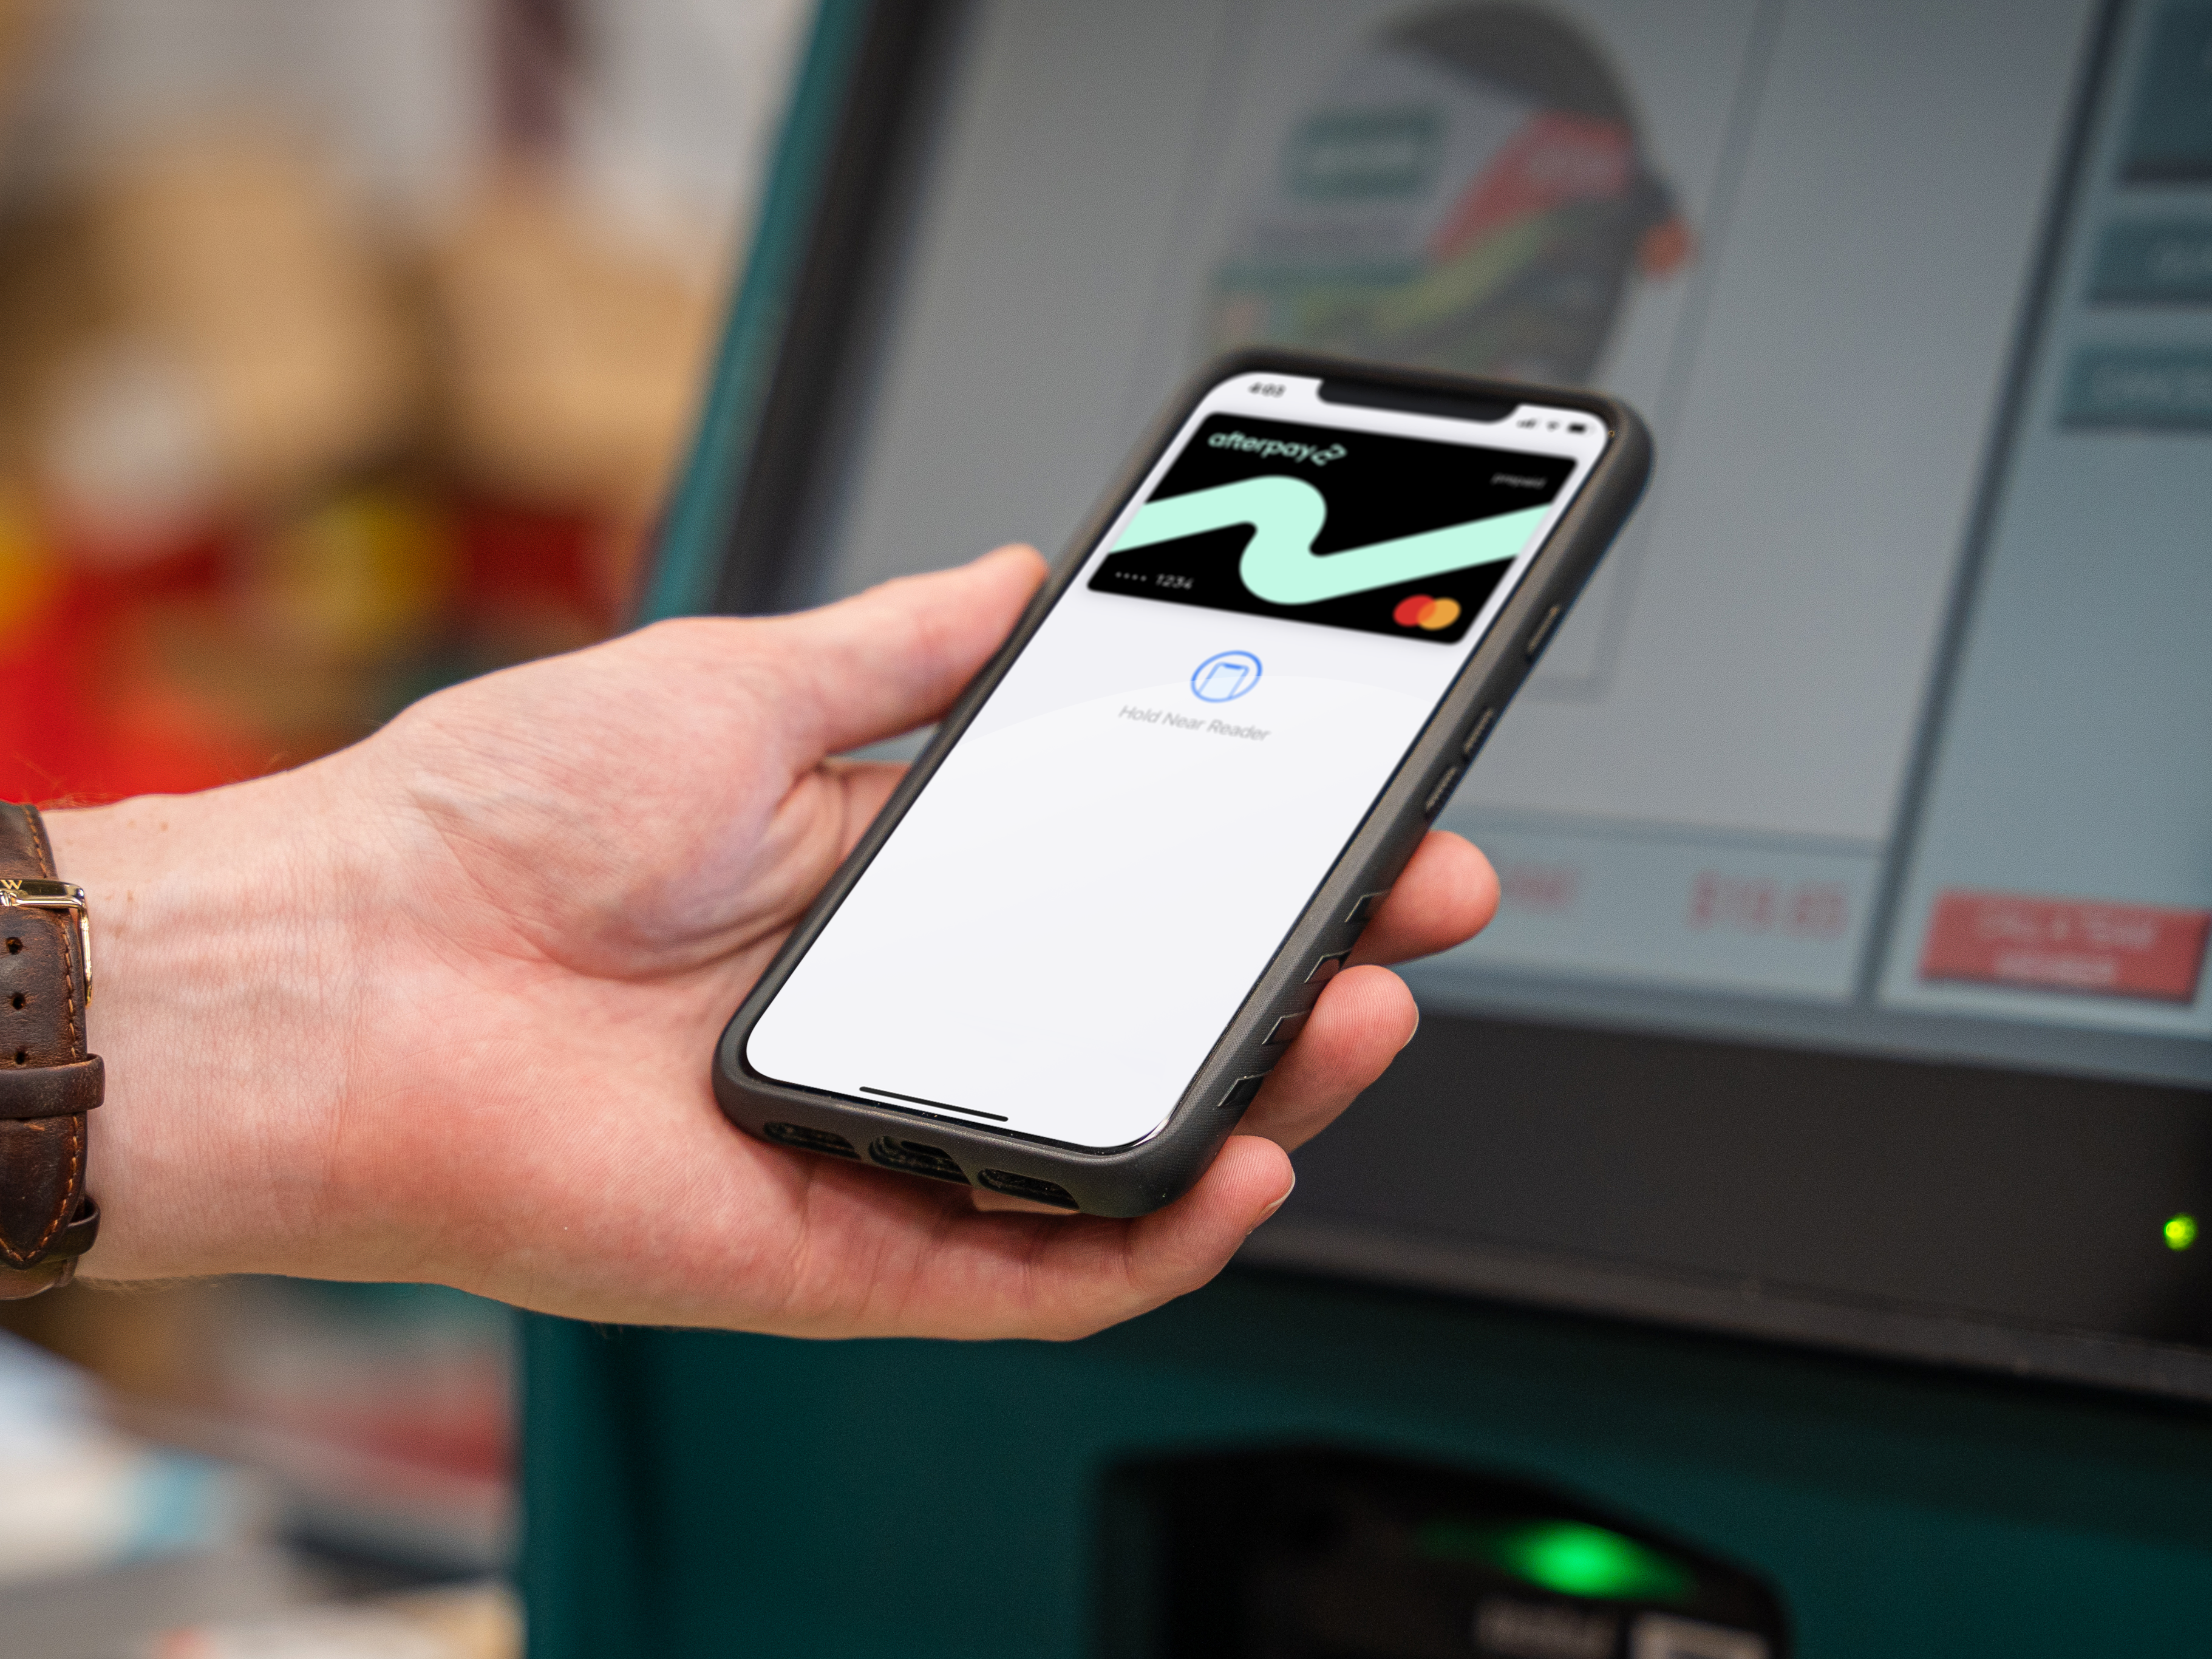 DIY shoppers get ready, Afterpay is now available at Bunnings